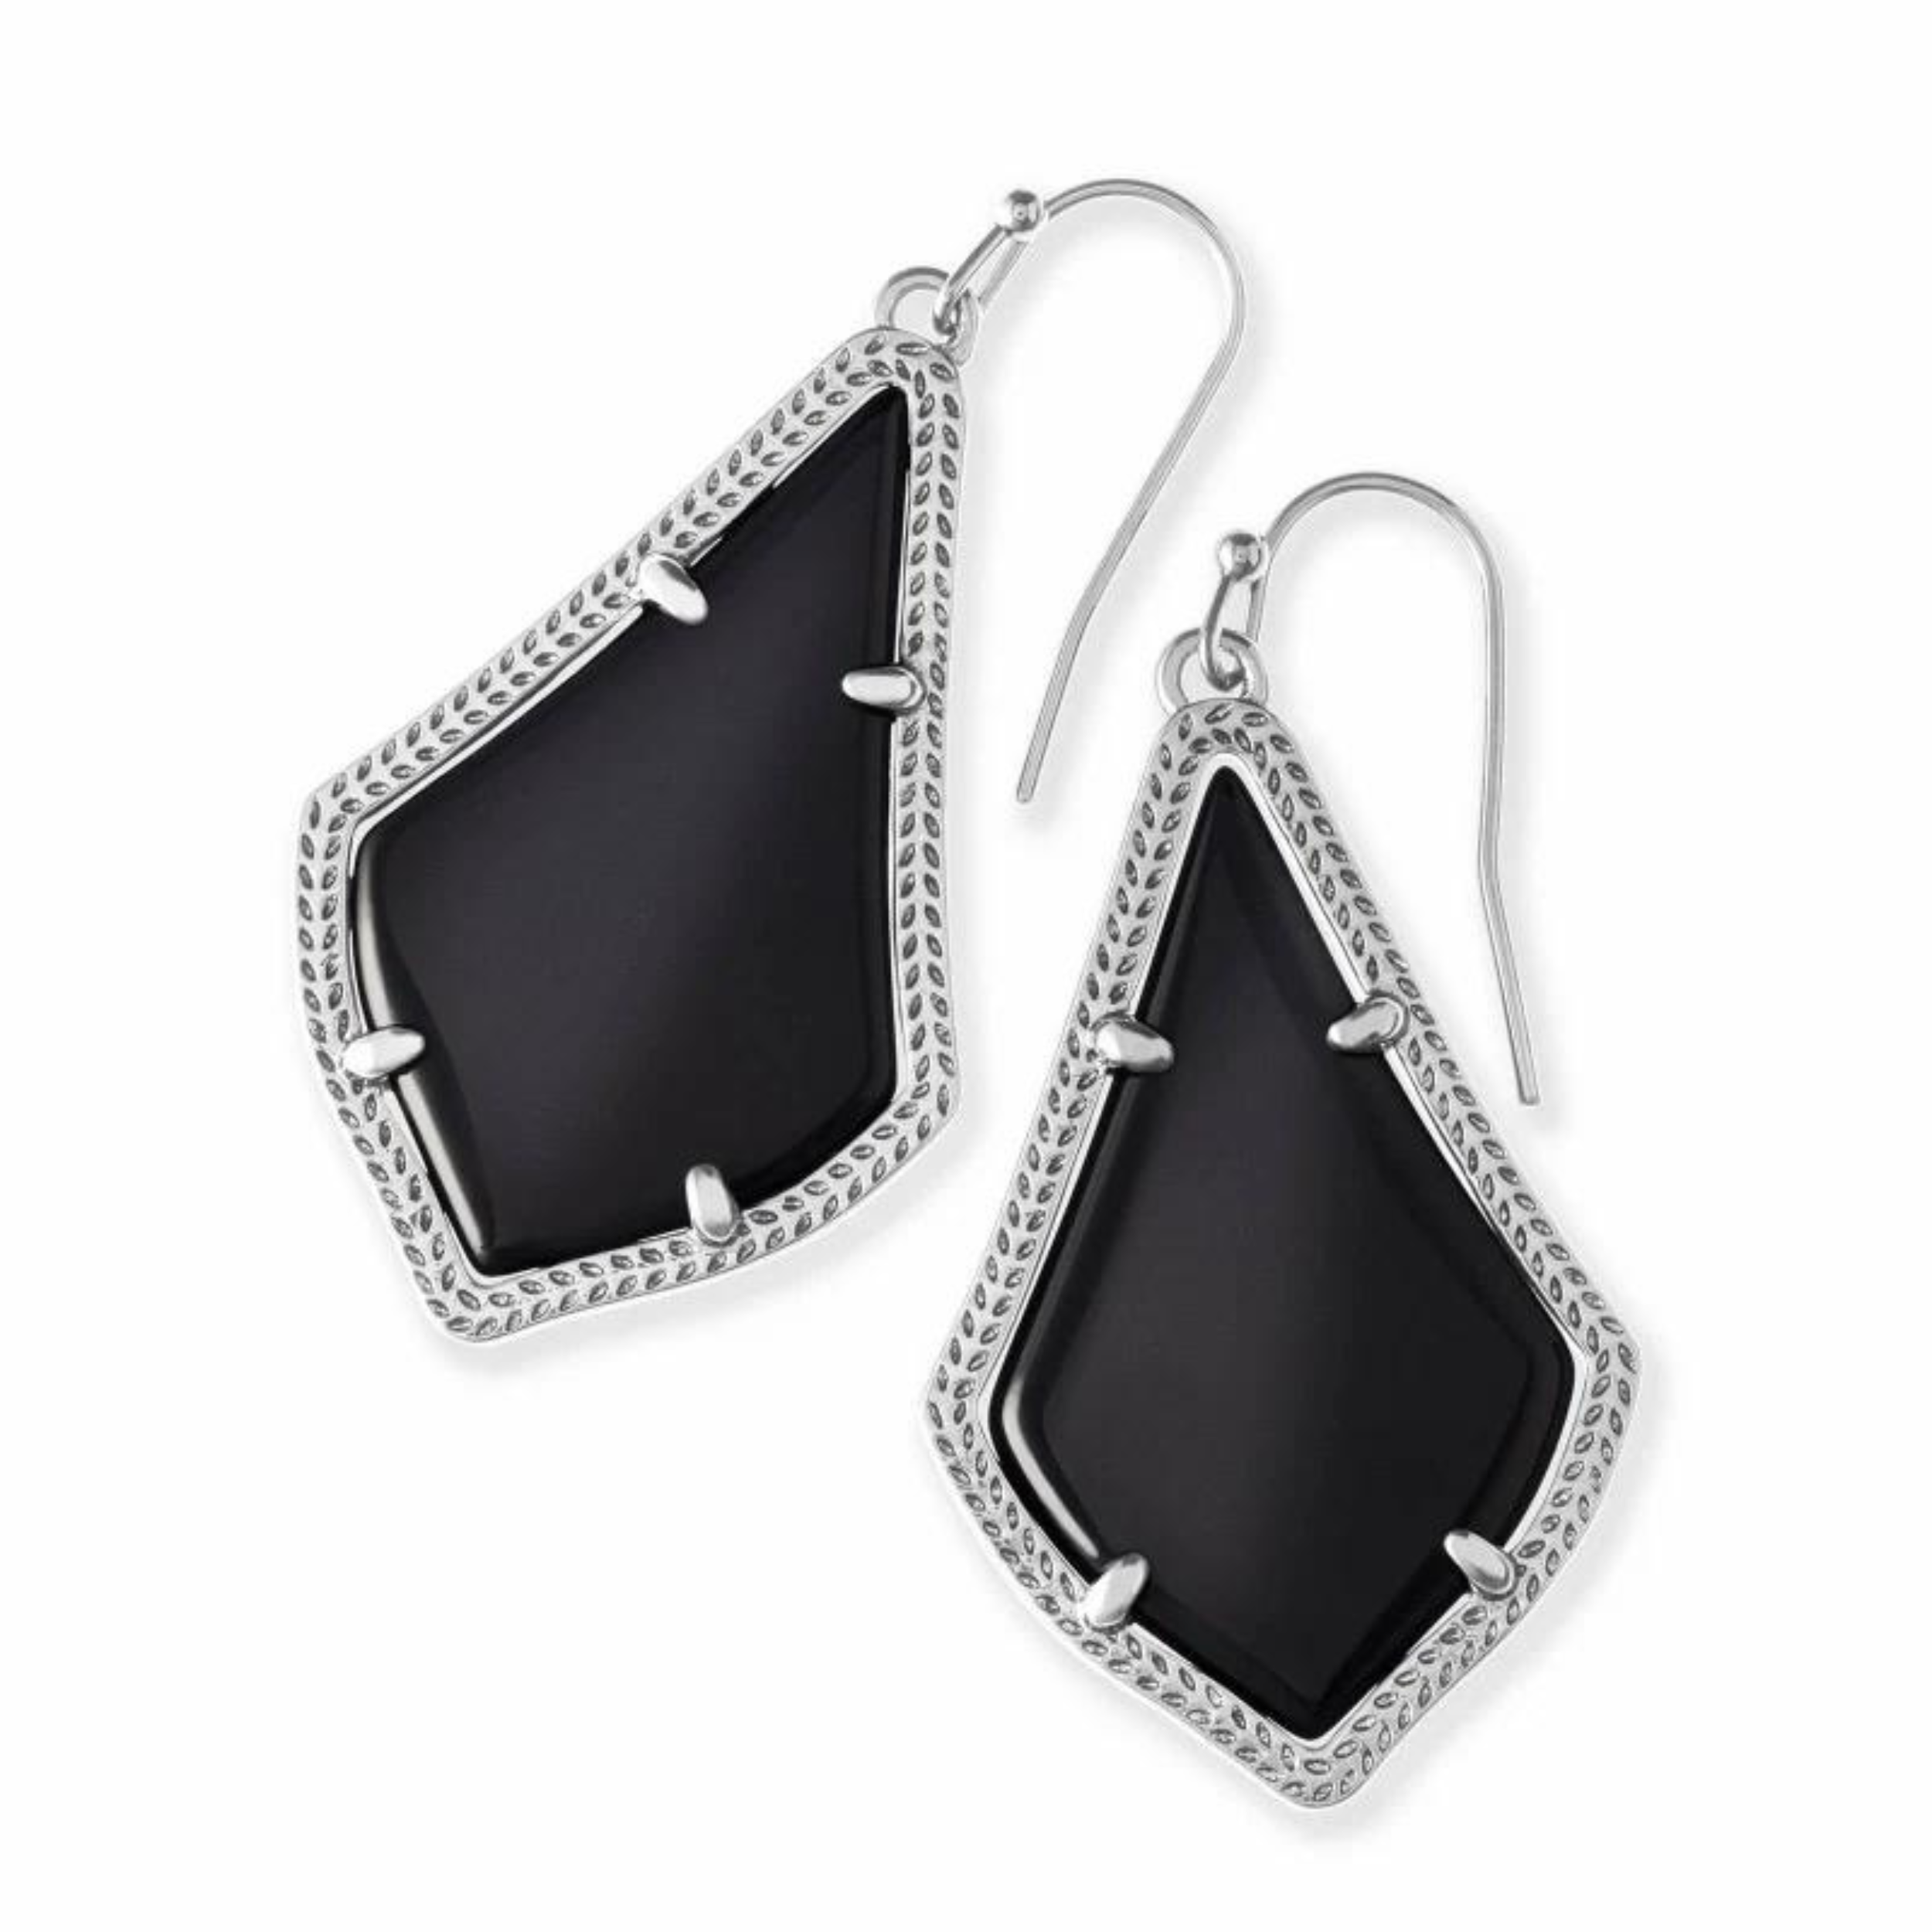 Silver dangle earrings with black opeaque stone, pictured on a white background.